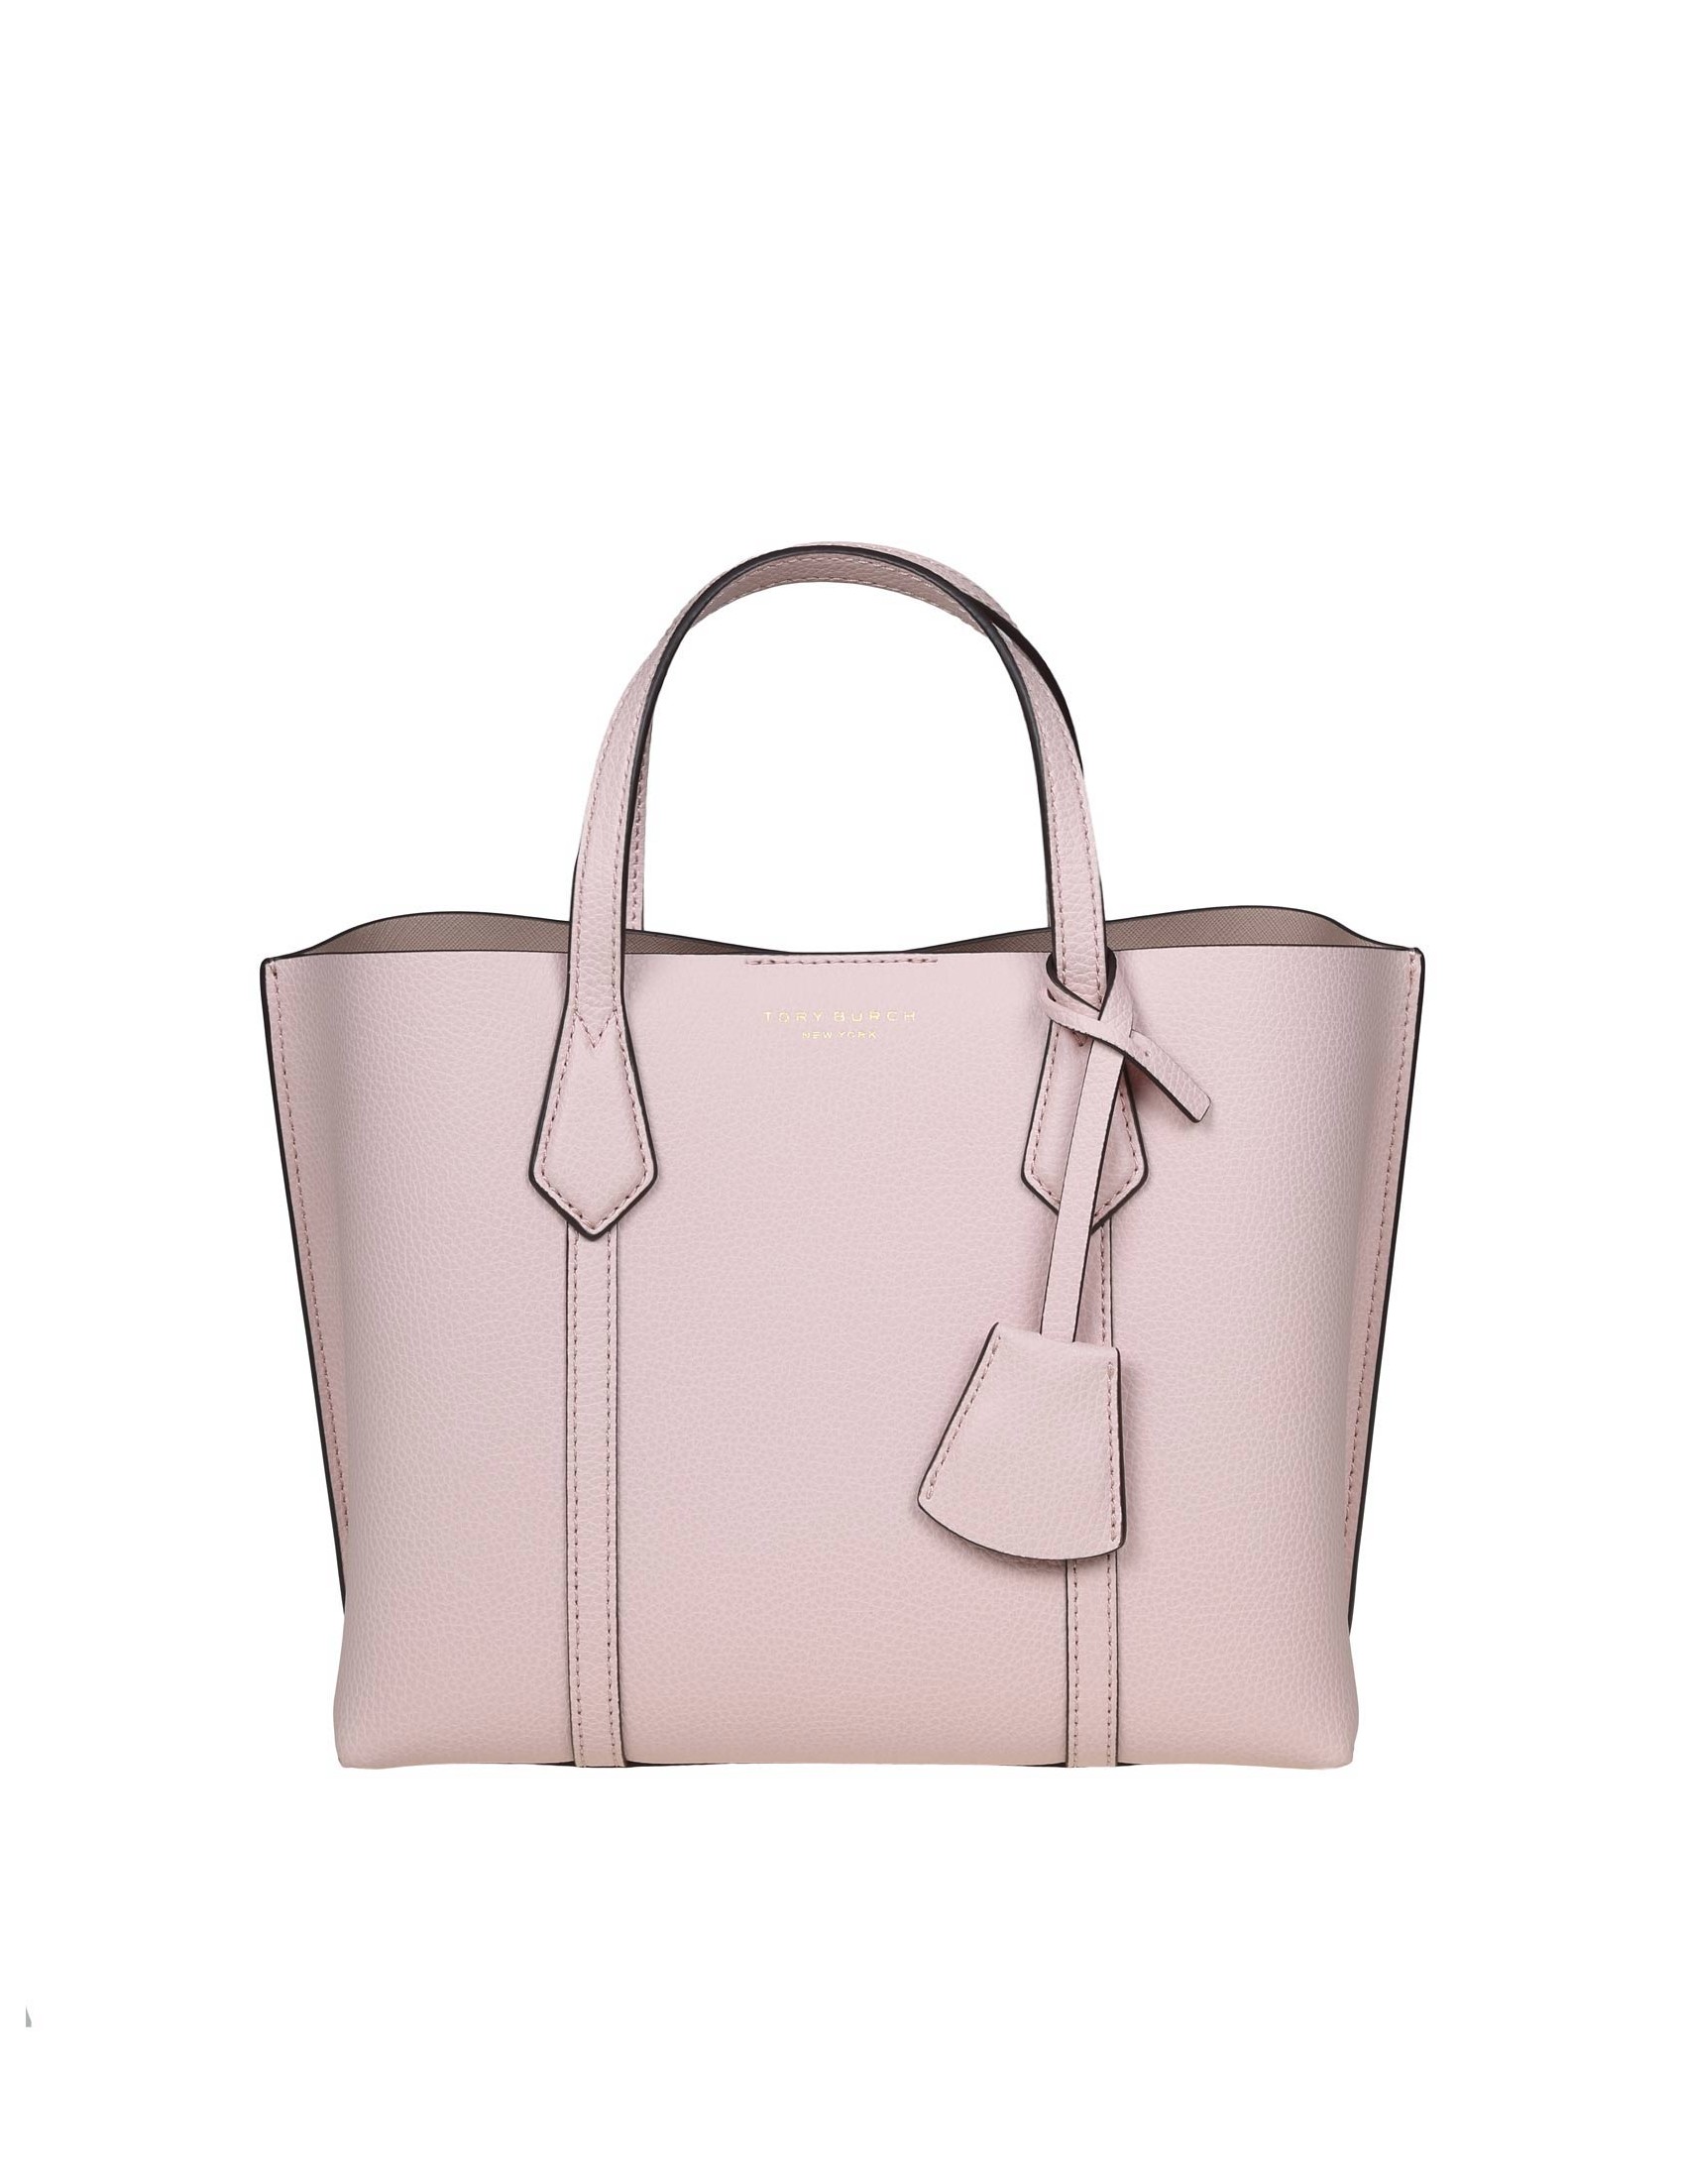 TORY BURCH SHOPPING PERRY SMALL TRIPLE-COMPARTMENT TOTE IN PINK LEATHER